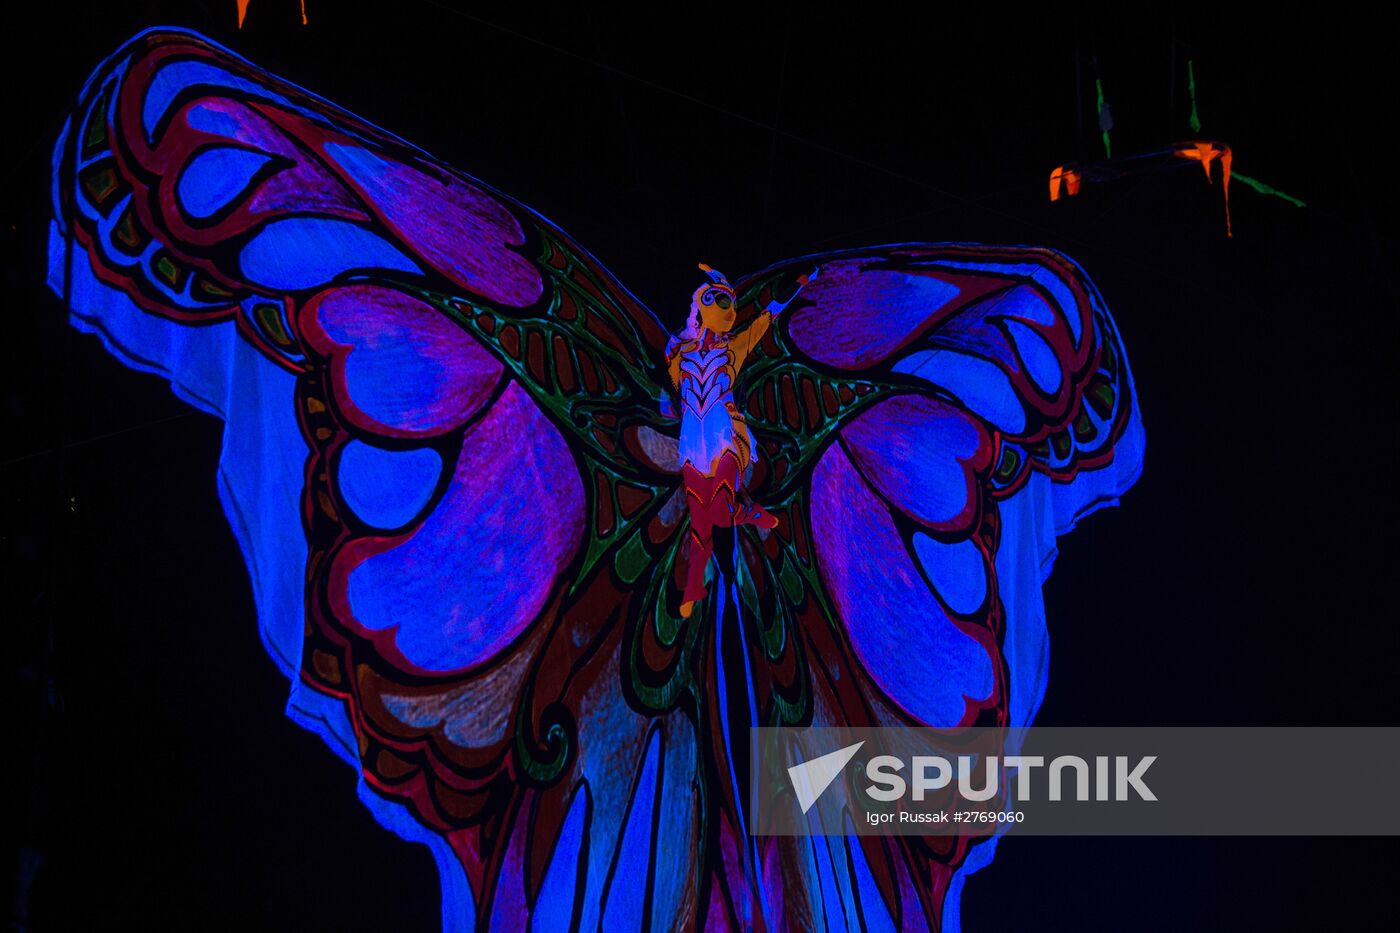 'UFO. A Circus from Another Planet' show performed in St. Petersburg